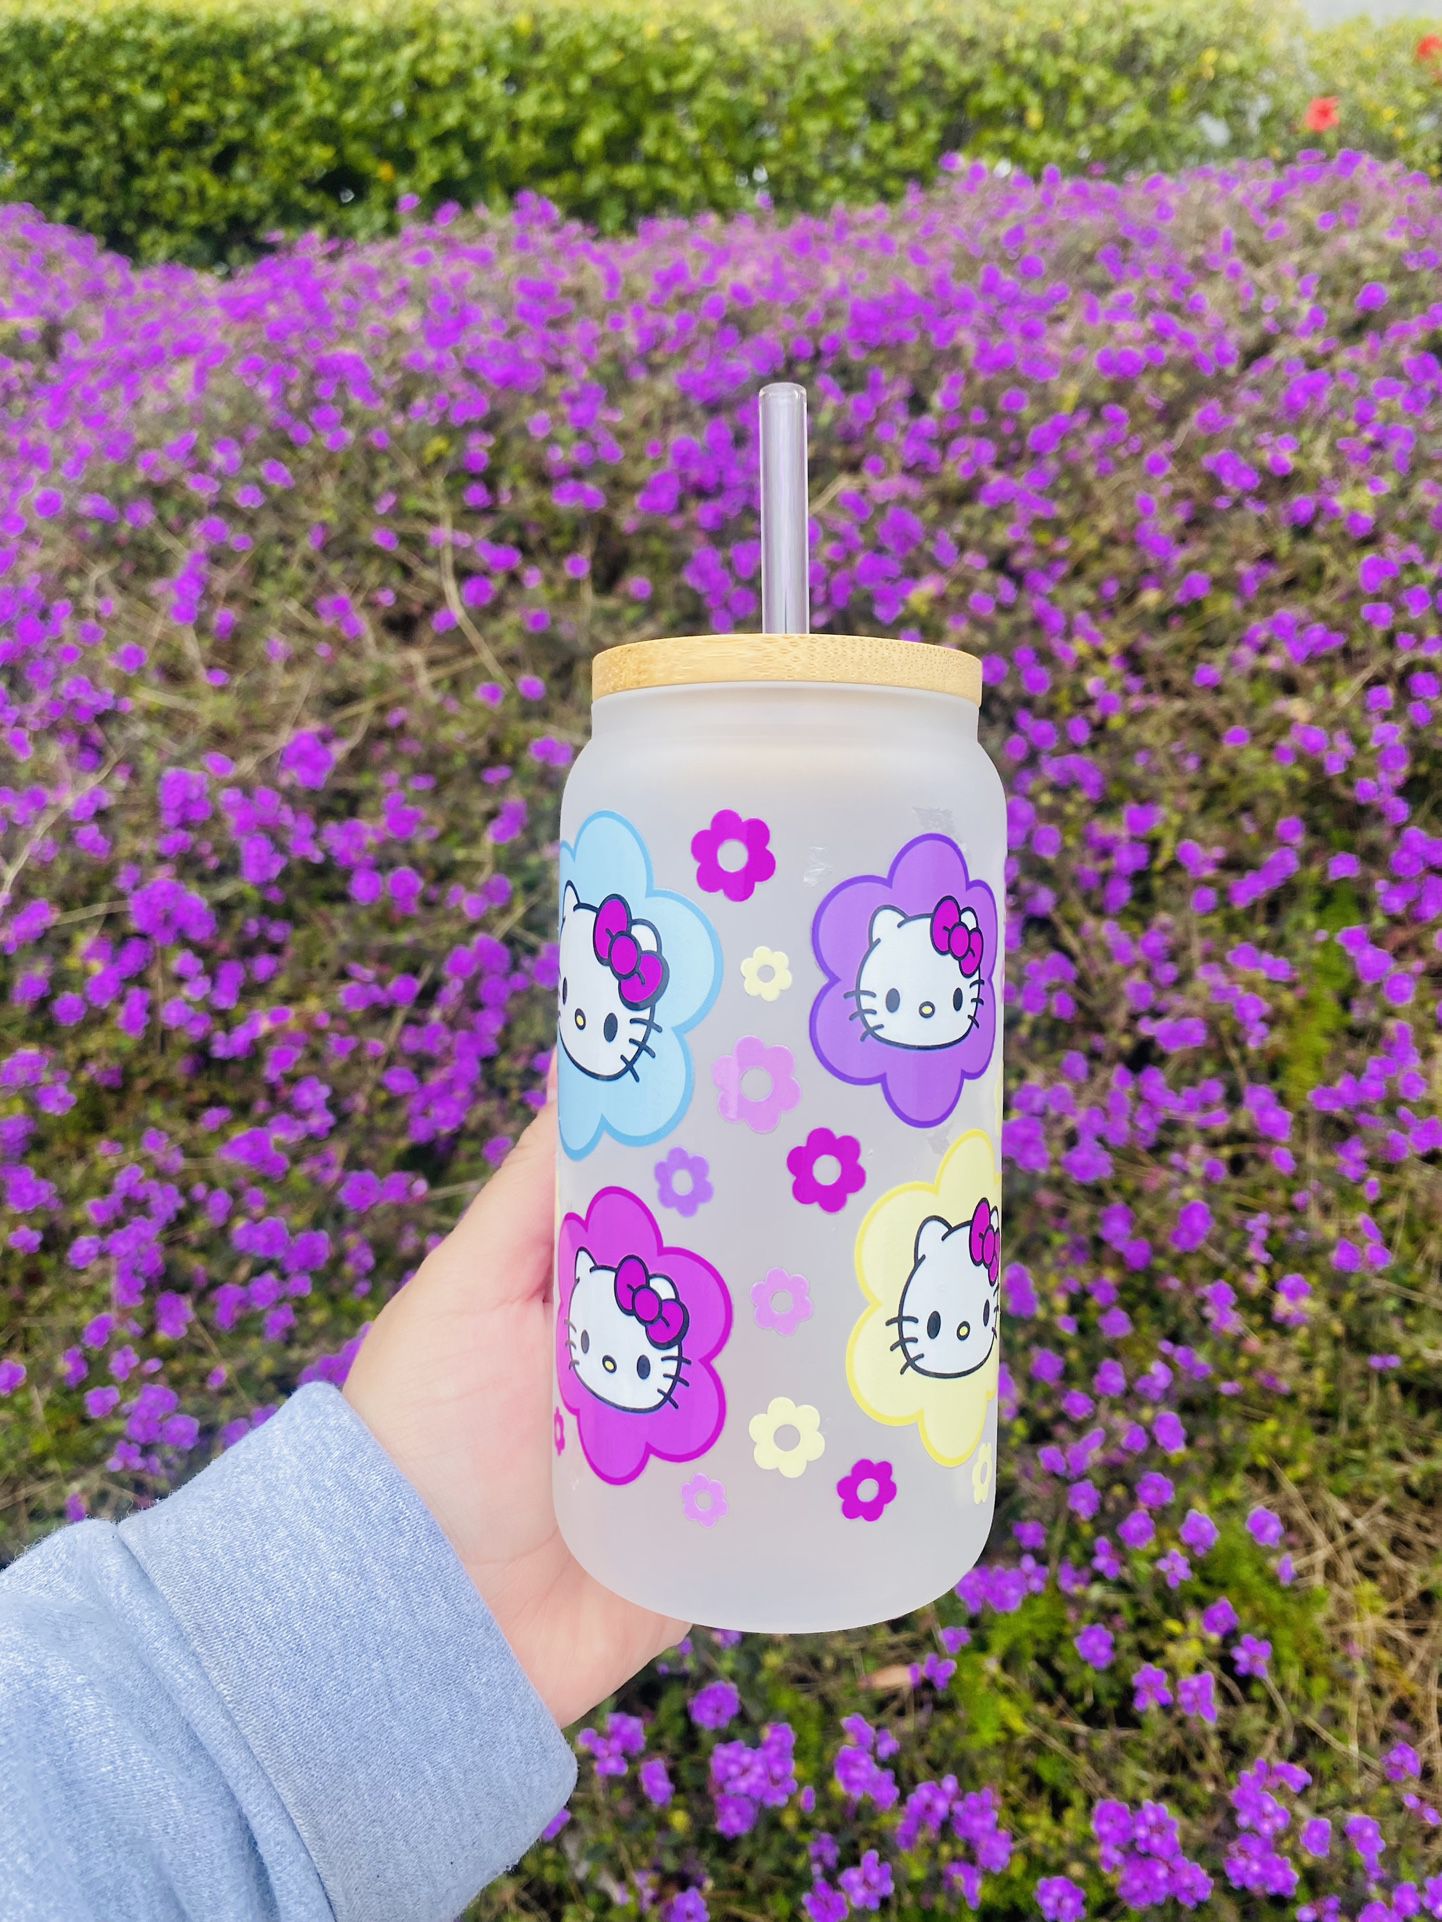 Hello Kitty / Sanrio Glass Cup for Sale in Long Beach, CA - OfferUp